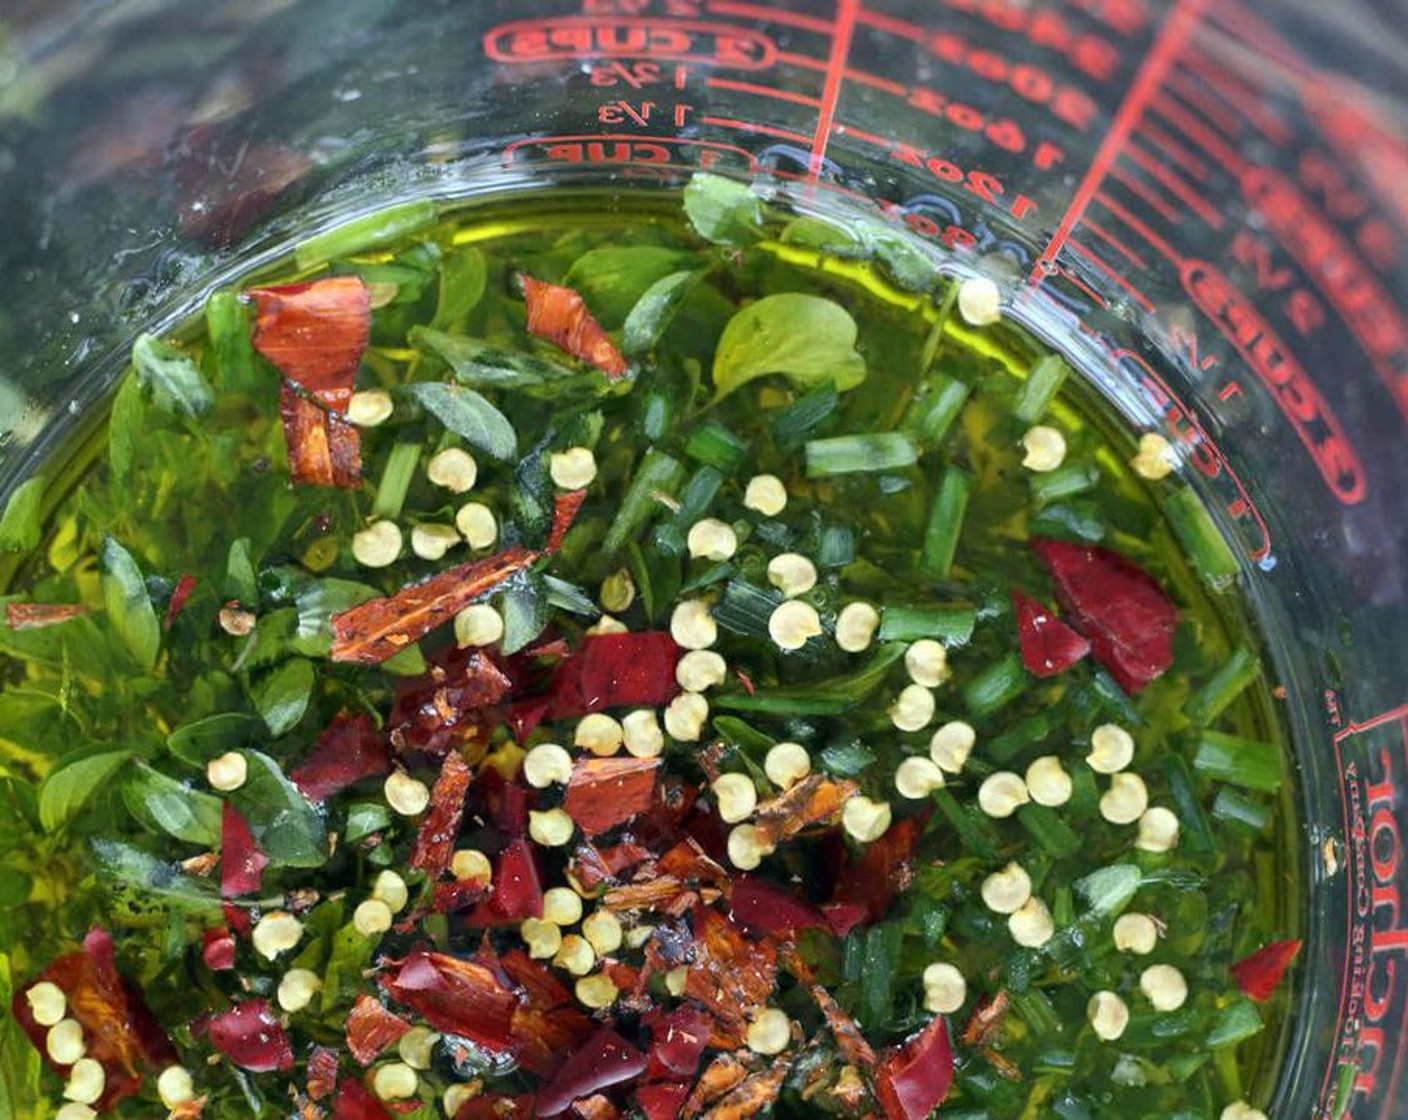 step 2 In a small bowl or measuring glass, combine Ground Black Pepper (1/2 tsp), Sea Salt (1/2 tsp), Extra-Virgin Olive Oil (1/2 cup), White Wine Vinegar (1/2 cup), Garlic (4 cloves), Fresh Oregano (3 Tbsp), Fresh Chives (3 Tbsp), Red Fresno Chili Peppers (2), and Granulated Sugar (1 tsp) until well blended.